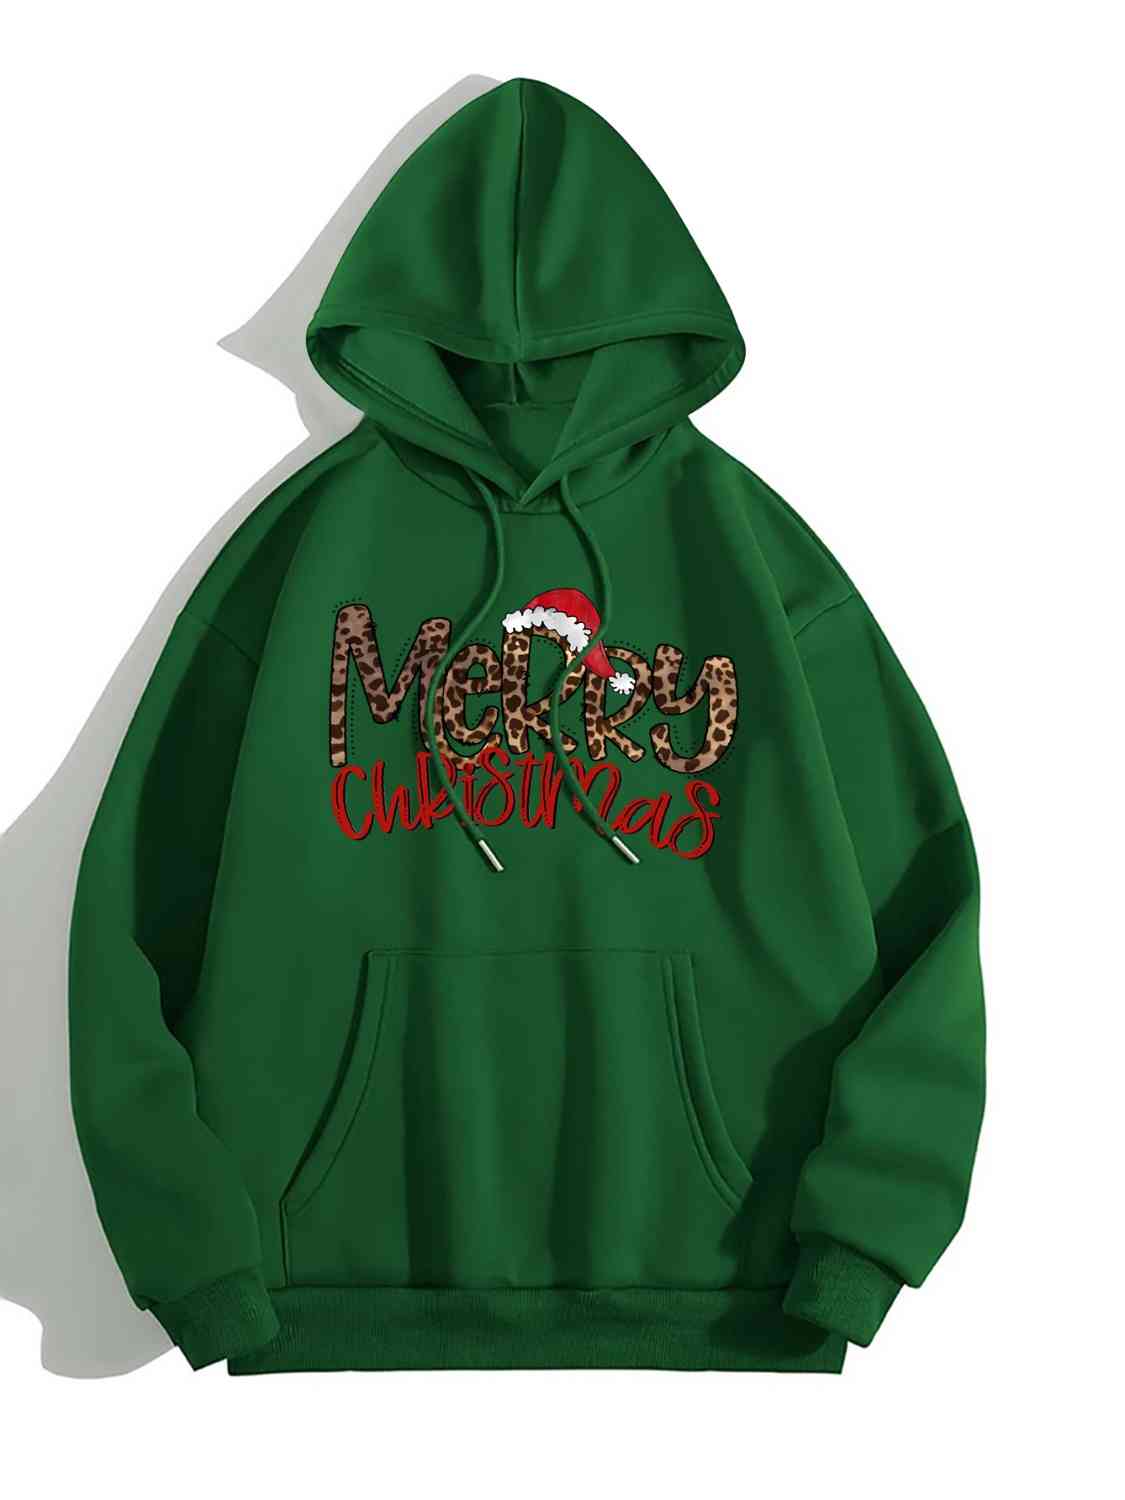 MERRY CHRISTMAS Graphic Drawstring Hoodie (4 Colors)  Krazy Heart Designs Boutique Green S 